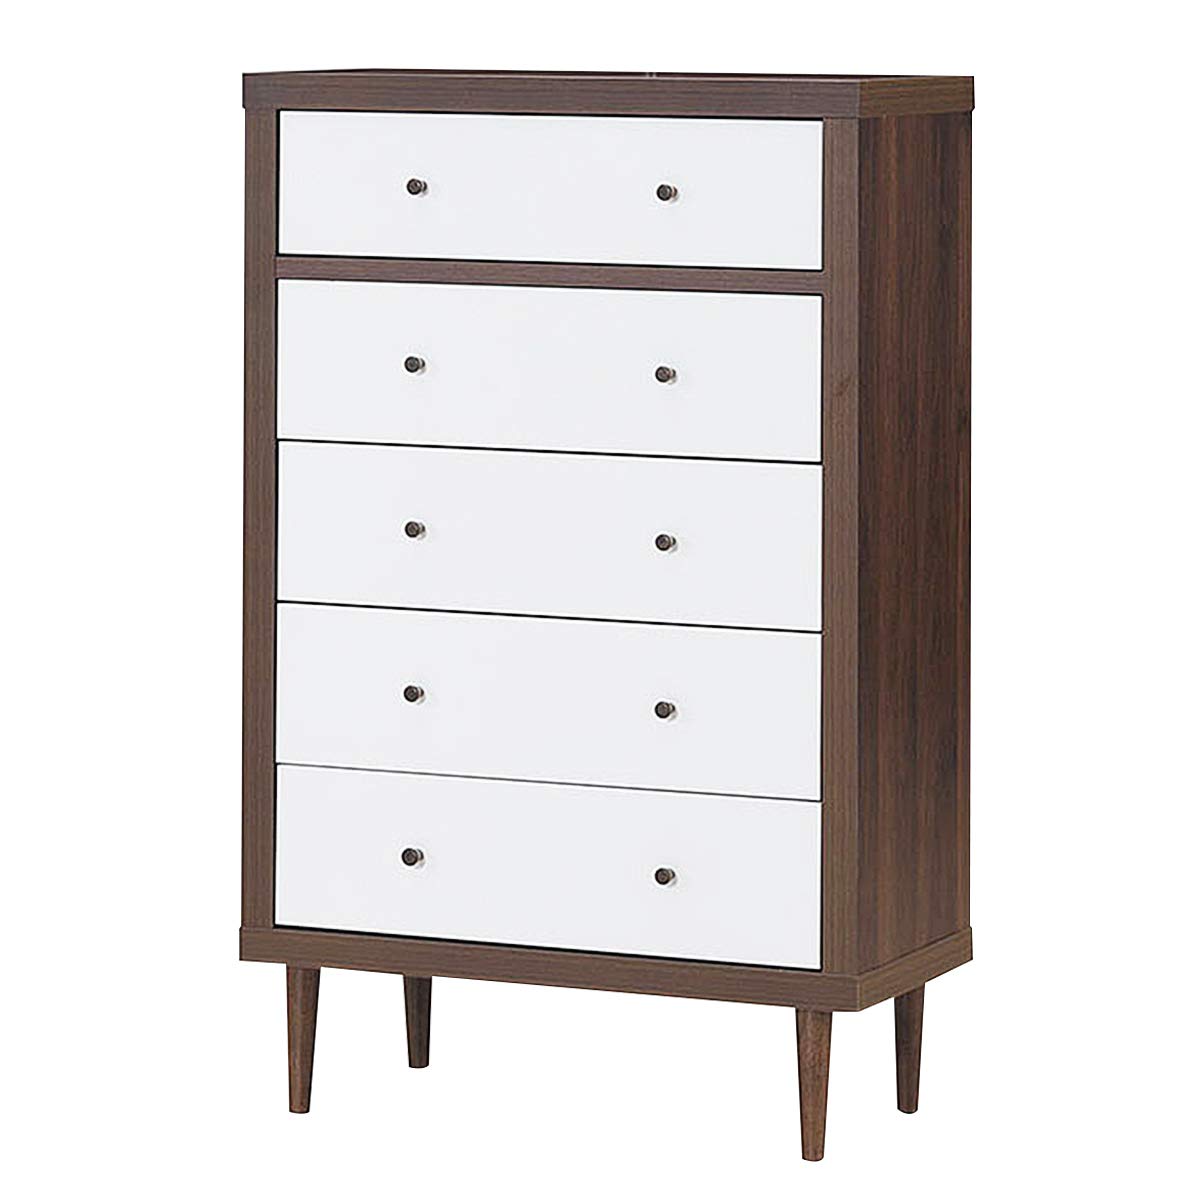 Giantex Drawer Dresser Wooden Chest W/Drawers, Sliding Rail and Stable Frame Antique-Style Free-Standing Chest for The Bedroom